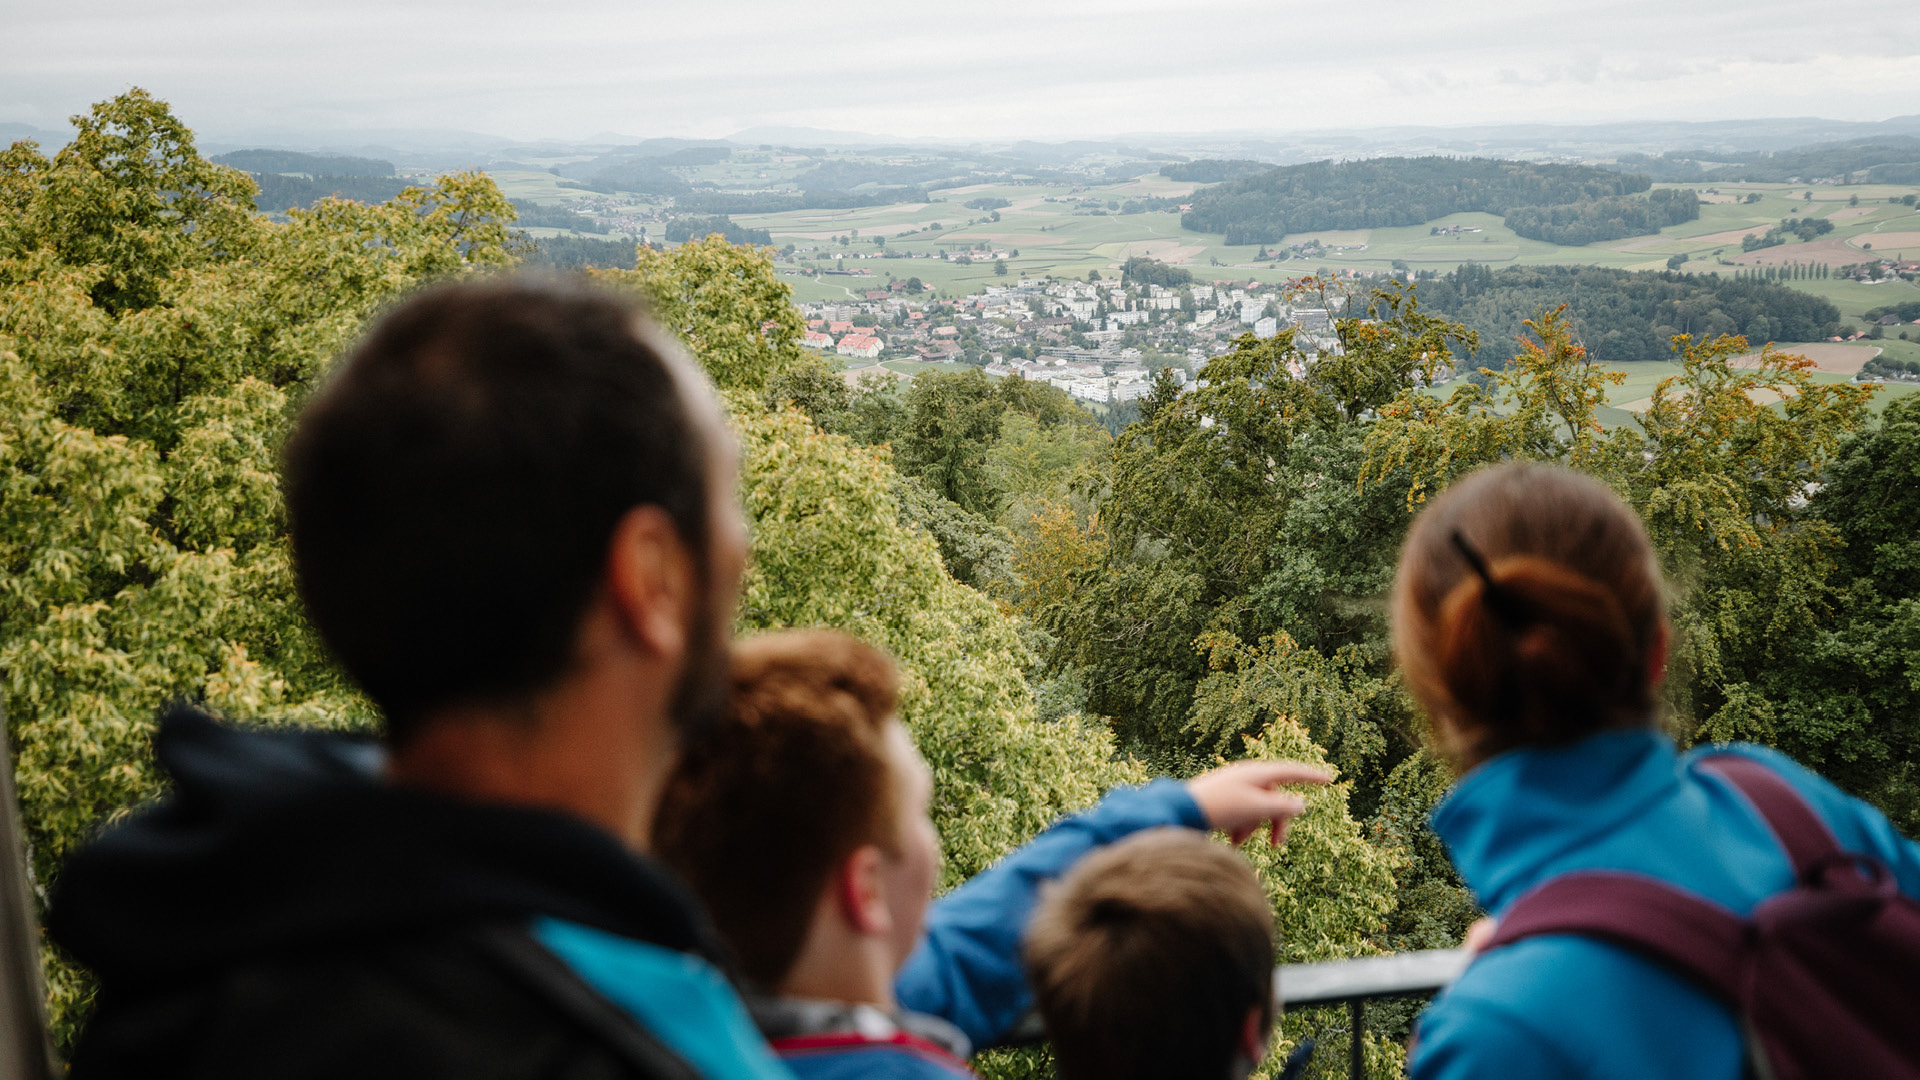 A family with two children taking in the view of the surrounding area from the observation tower.